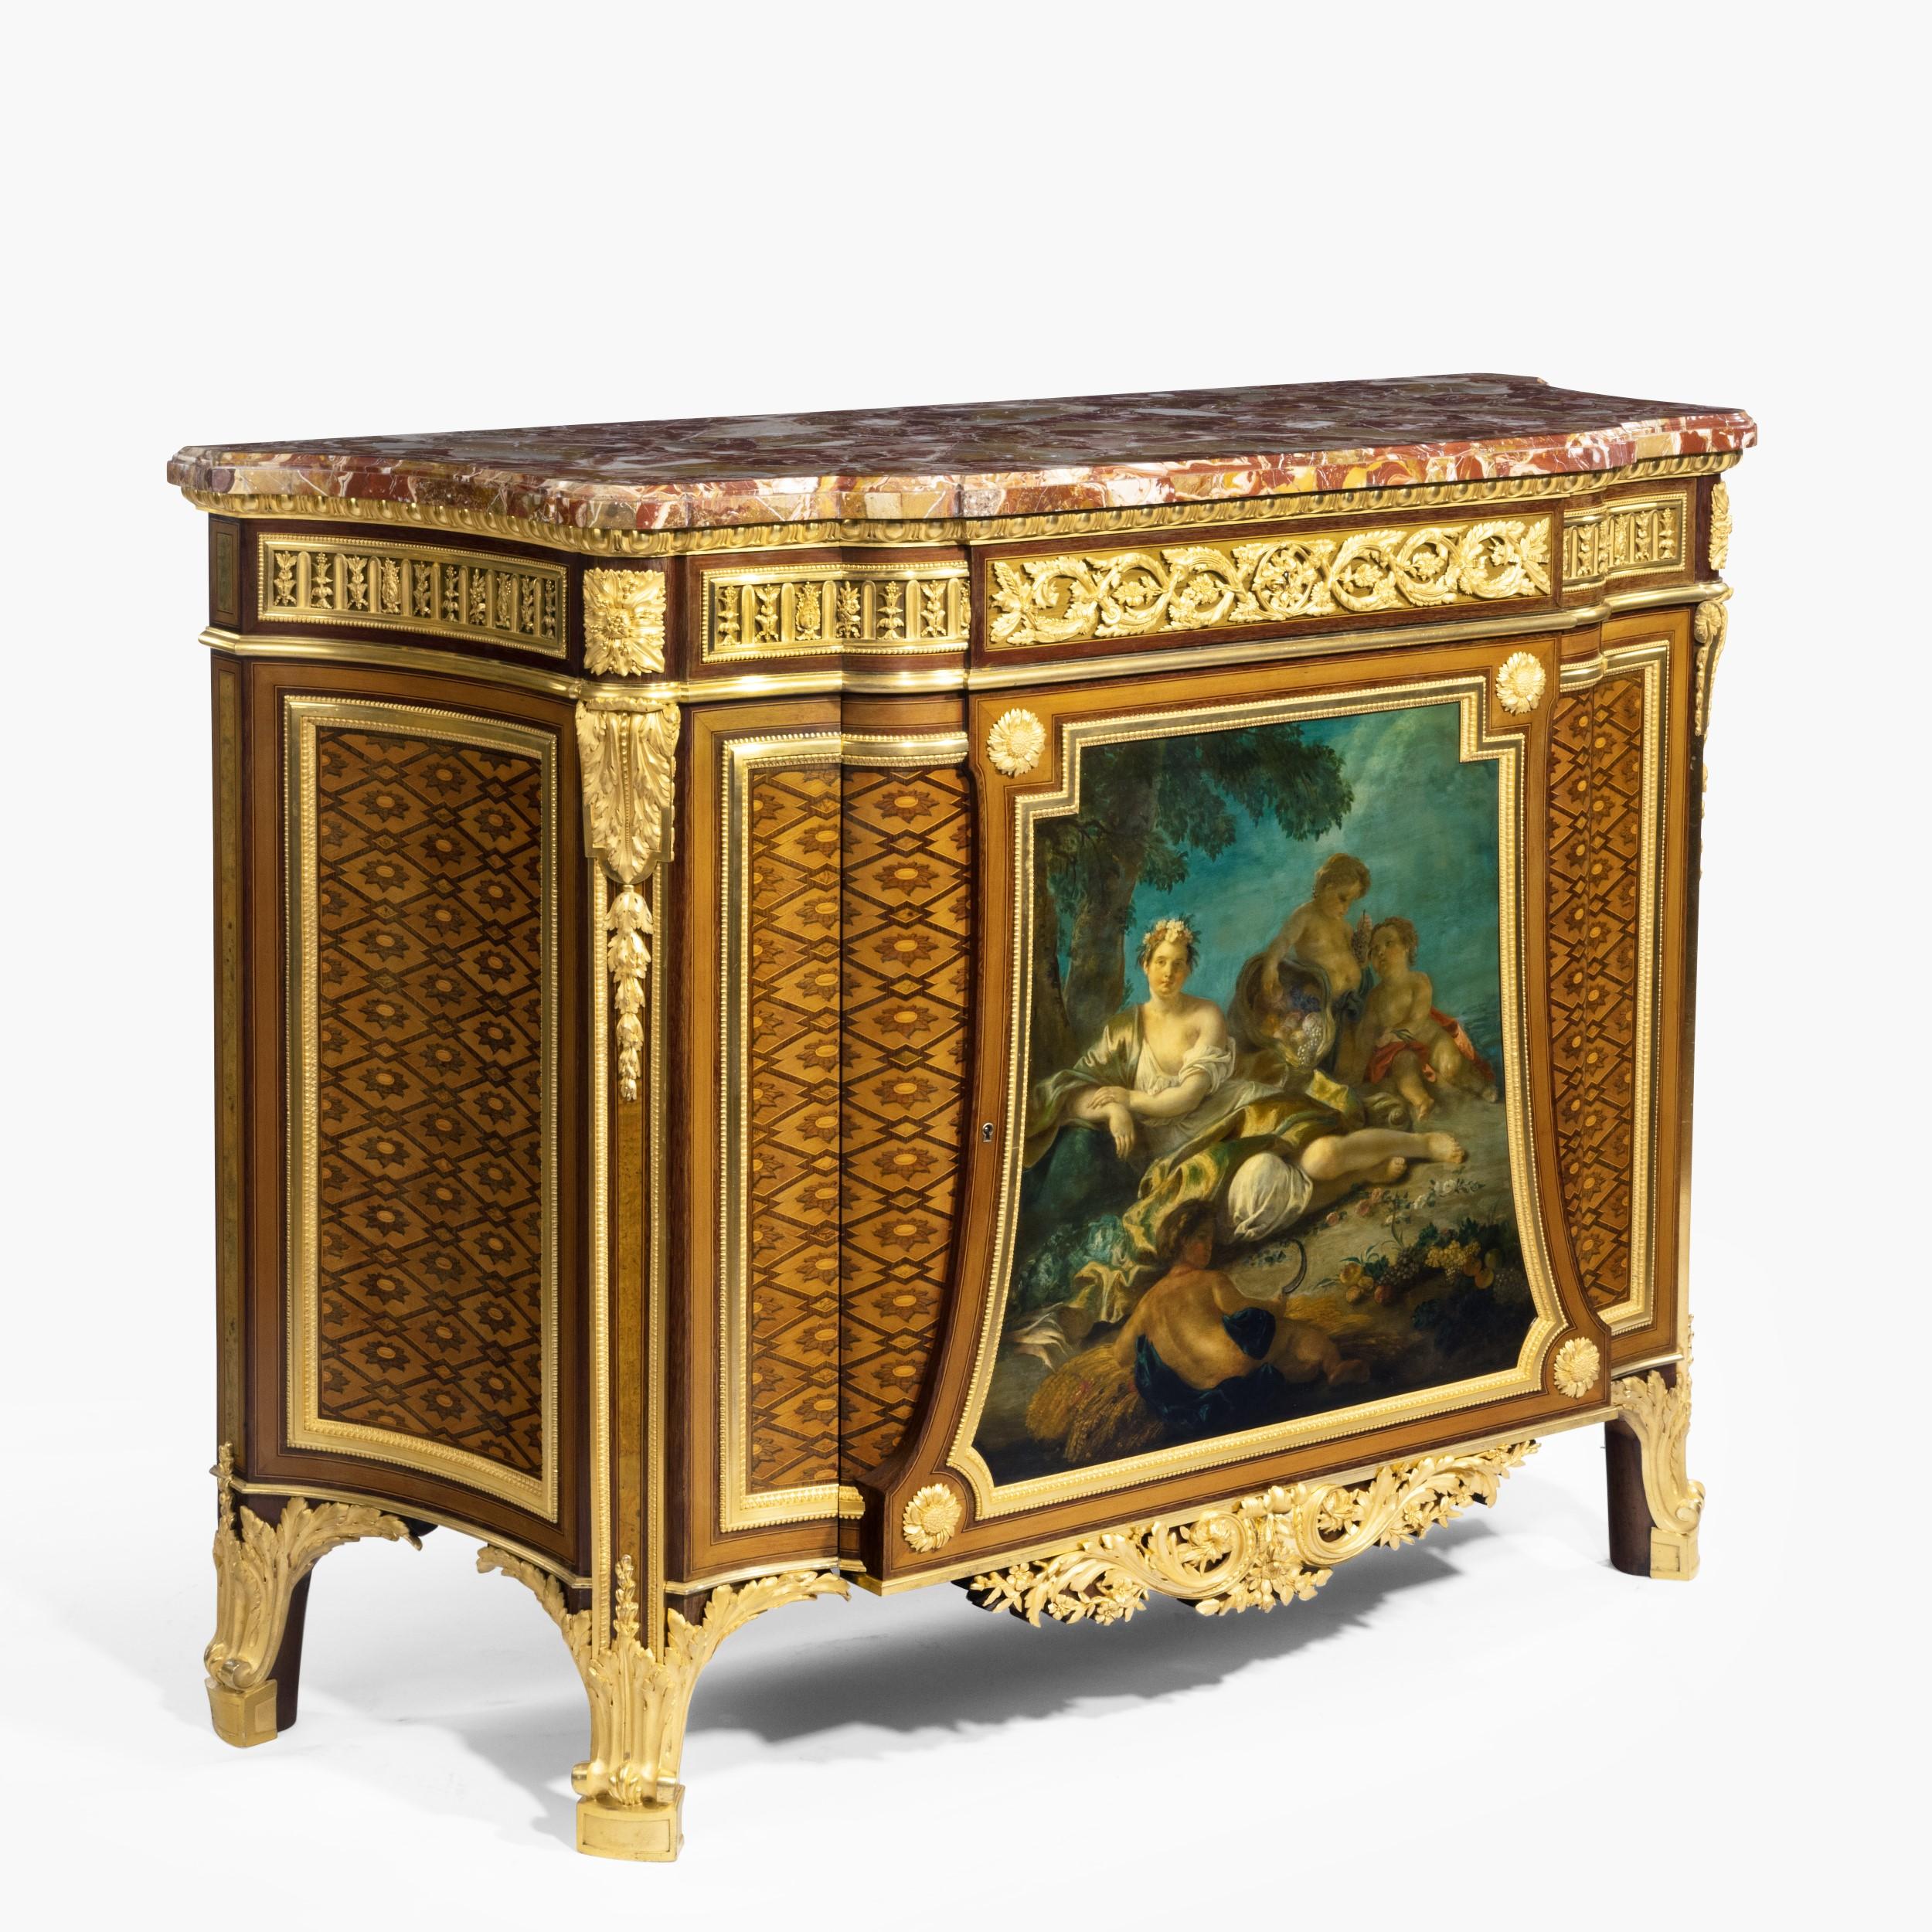 A very fine Louis XVI style gilt-bronze mounted Marquetry Commode
By Henry Dasson

After a model by Jean-Henri Riesener, supplied to Marie-Antoinette for Versailles. Constructed in a finely patinated harewood, with Brèche d'Alep marble platform,